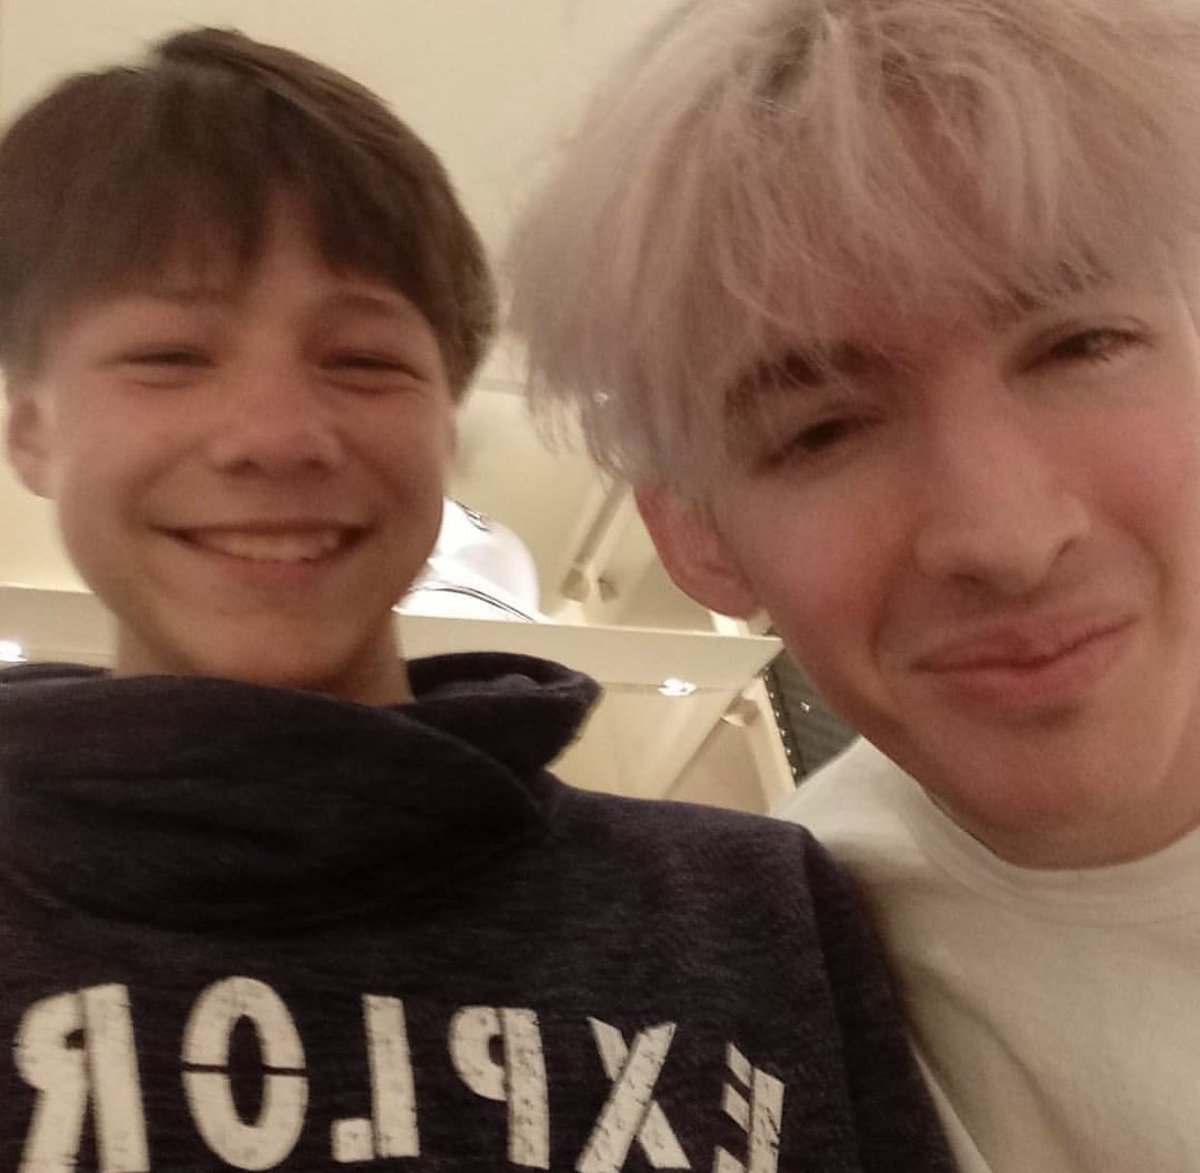 Albert On Twitter Met Sucrebers At Mall And Bought Women S Shoes